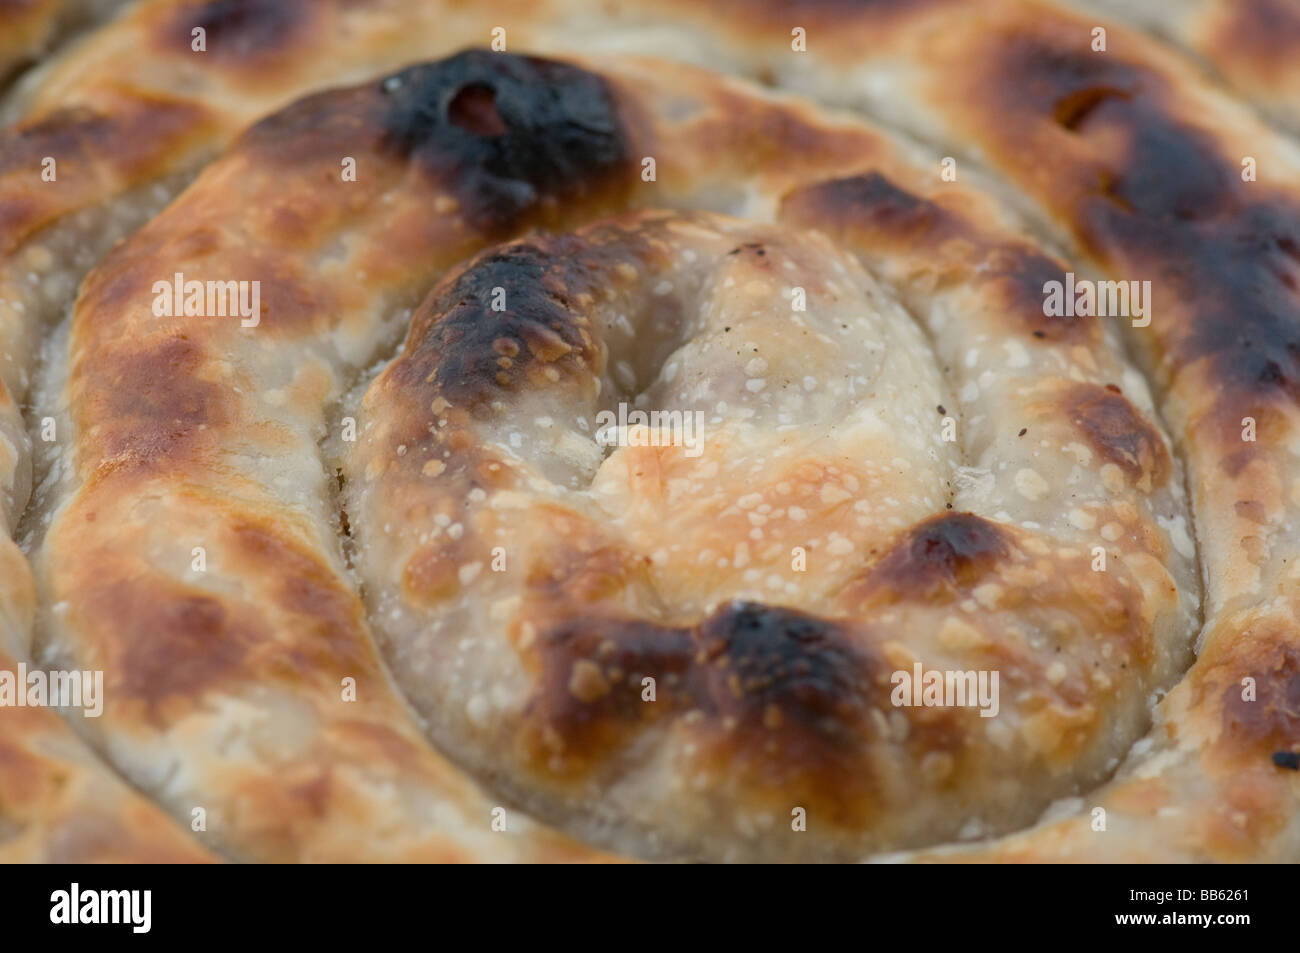 Close up of a Bosnian rolled Burek or Borek Pastry made of a thin flaky dough such as phyllo or yufka. Bosnia Stock Photo